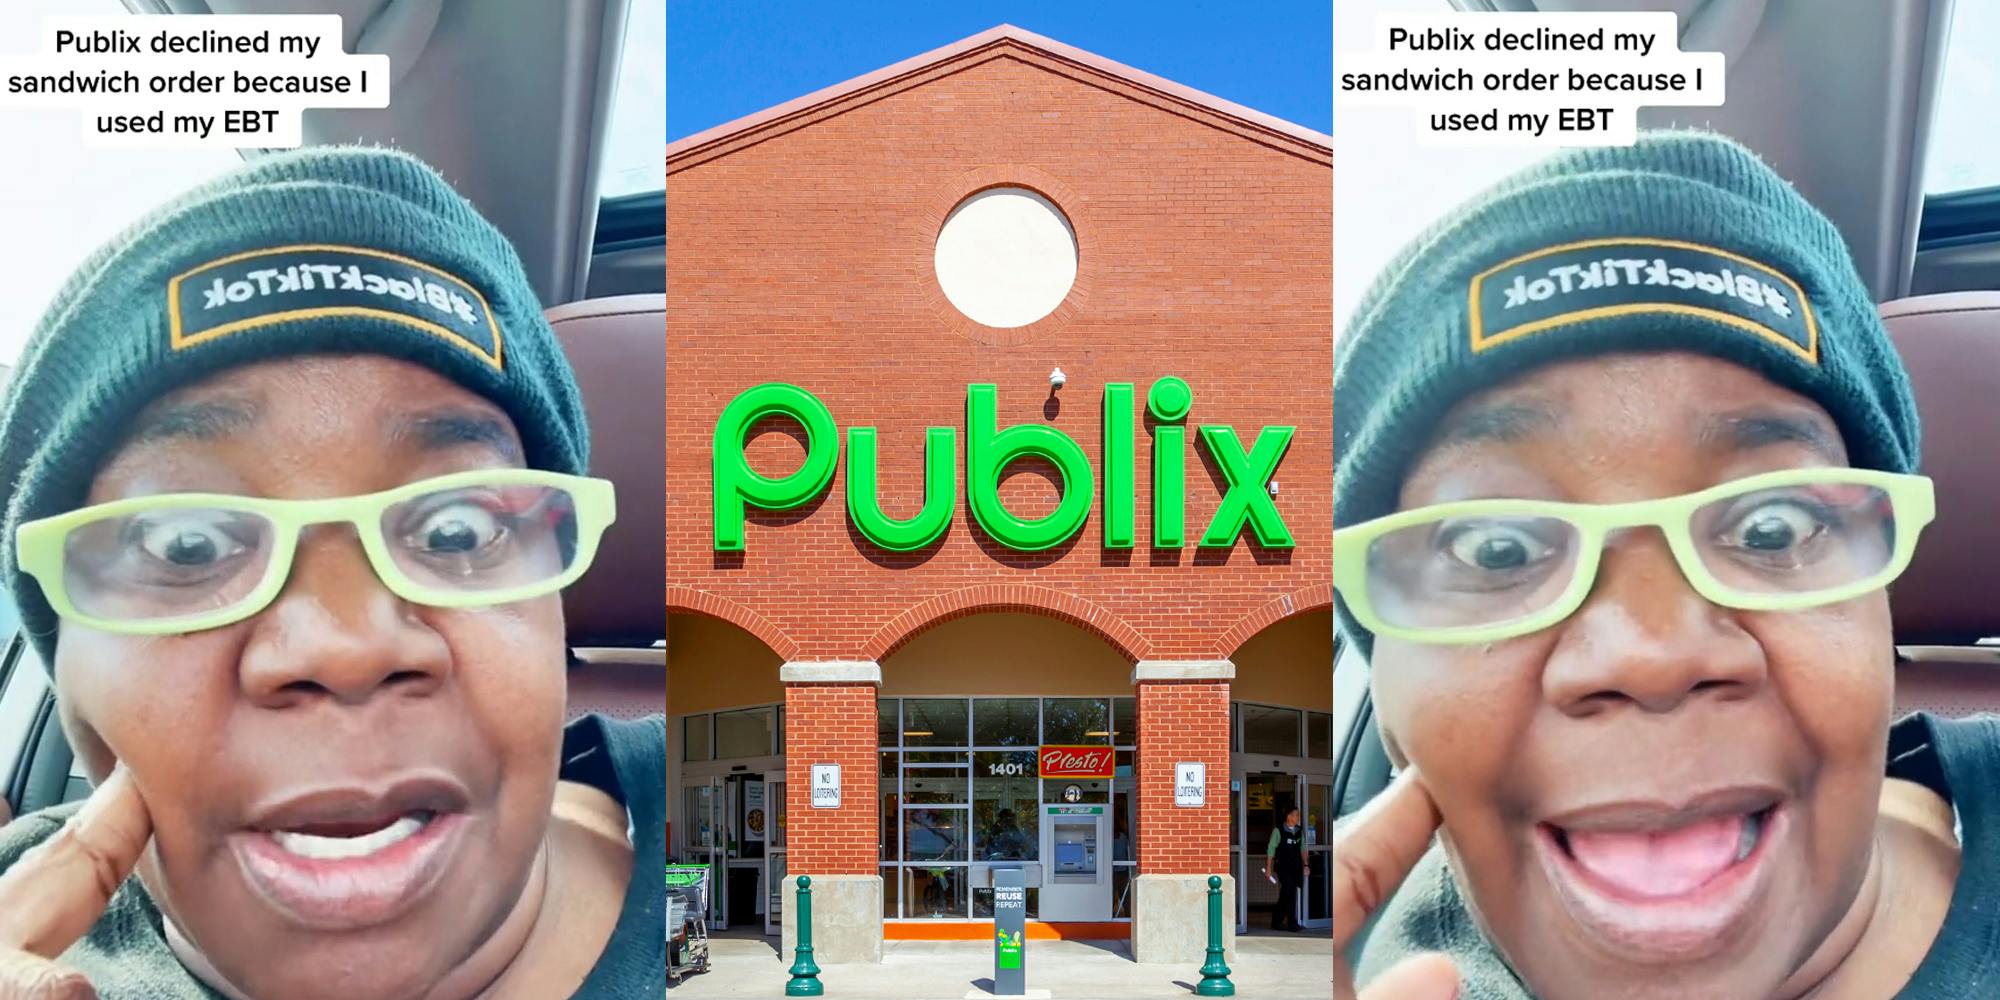 woman-says-publix-denied-her-use-of-ebt-for-sandwich